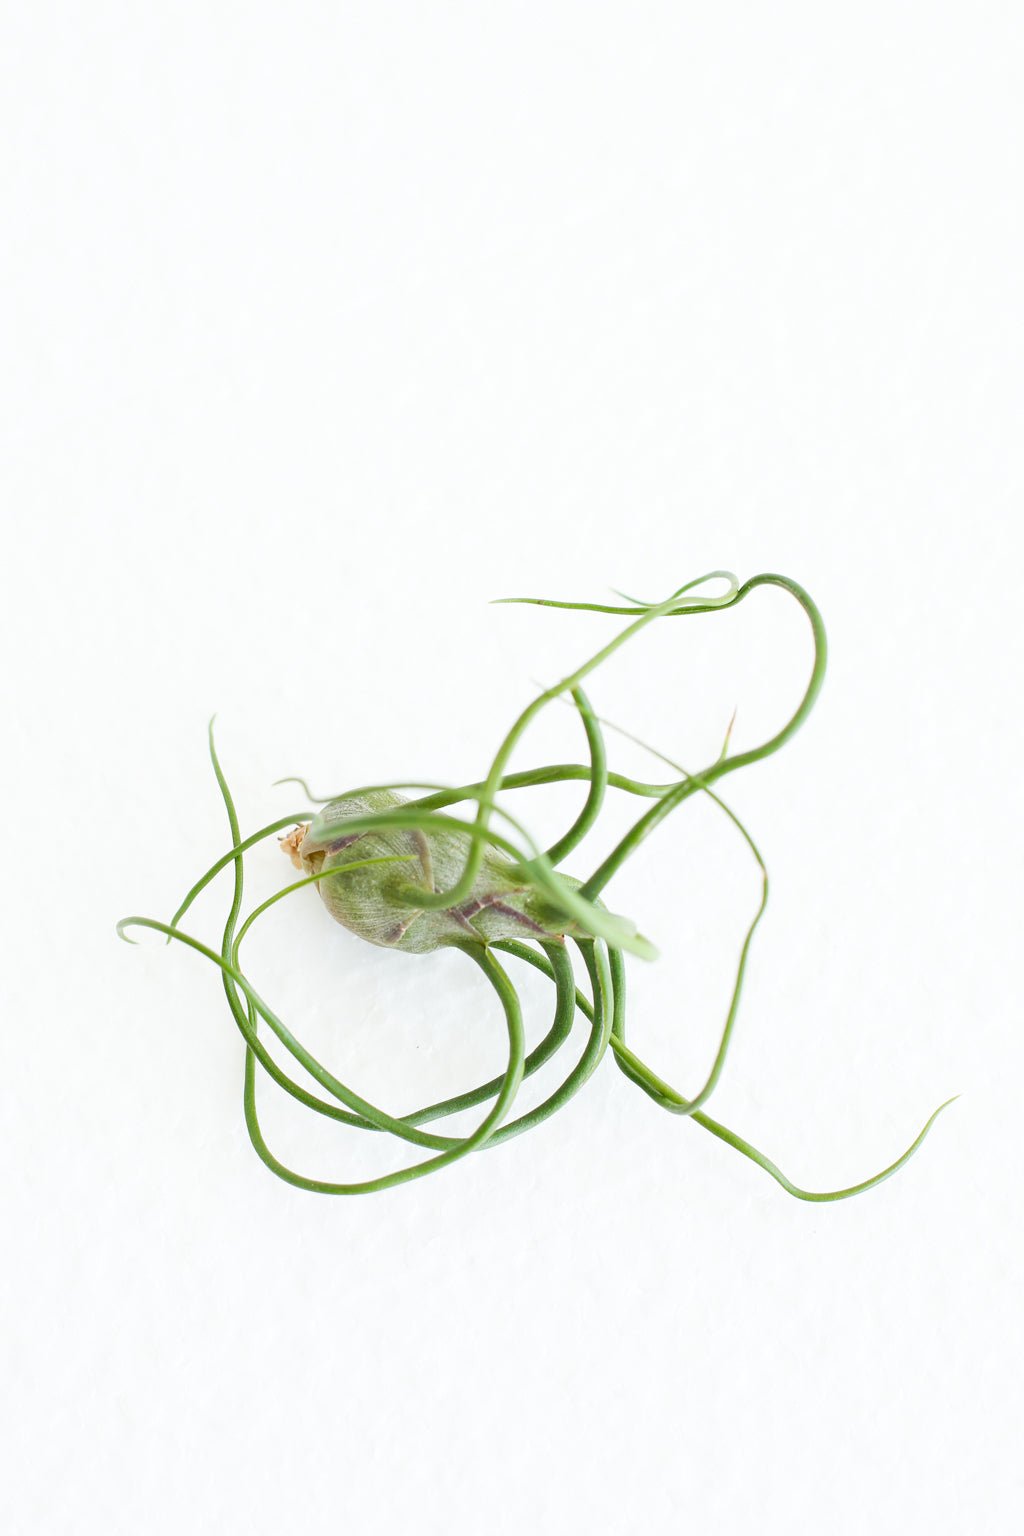 Air plant with waxy looking green leaves that twist and turn in different directions around the center of the plant